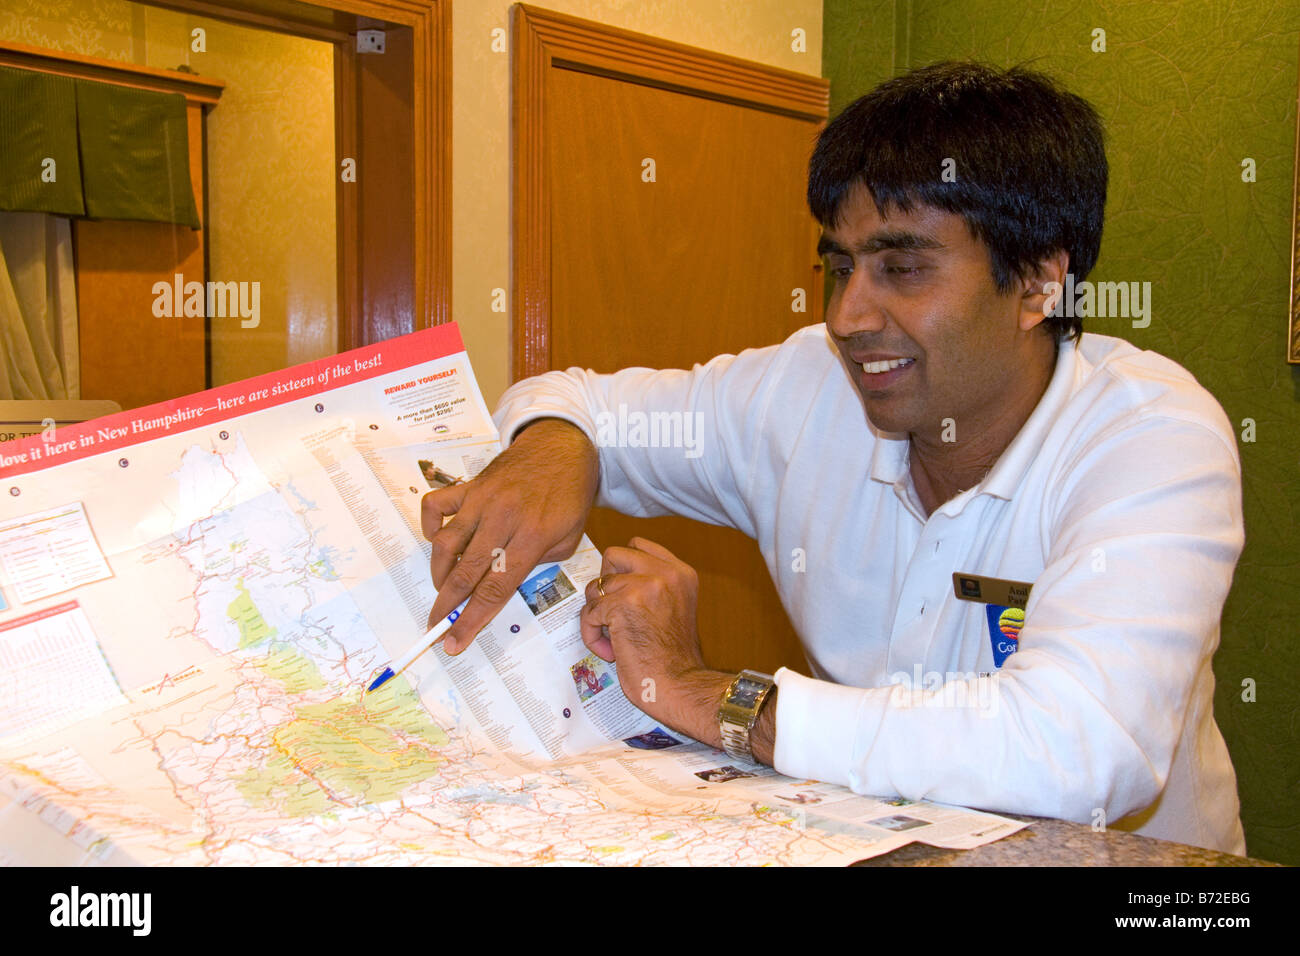 Hotel desk clerk using a map to give directions in the town of Ashland New Hampshire USA Stock Photo